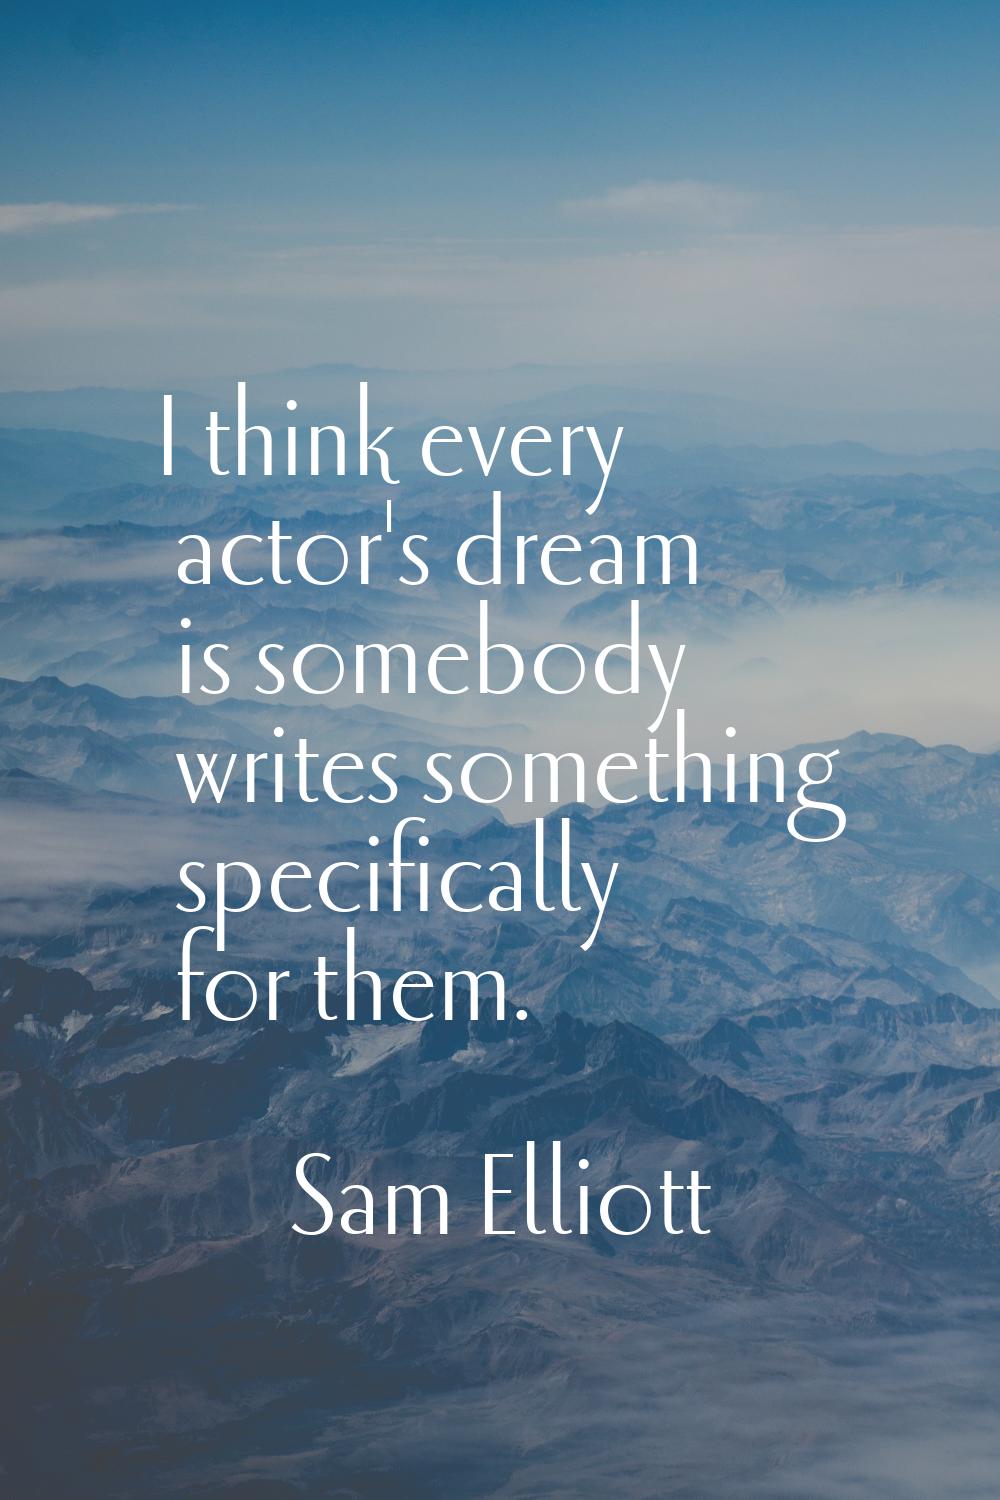 I think every actor's dream is somebody writes something specifically for them.